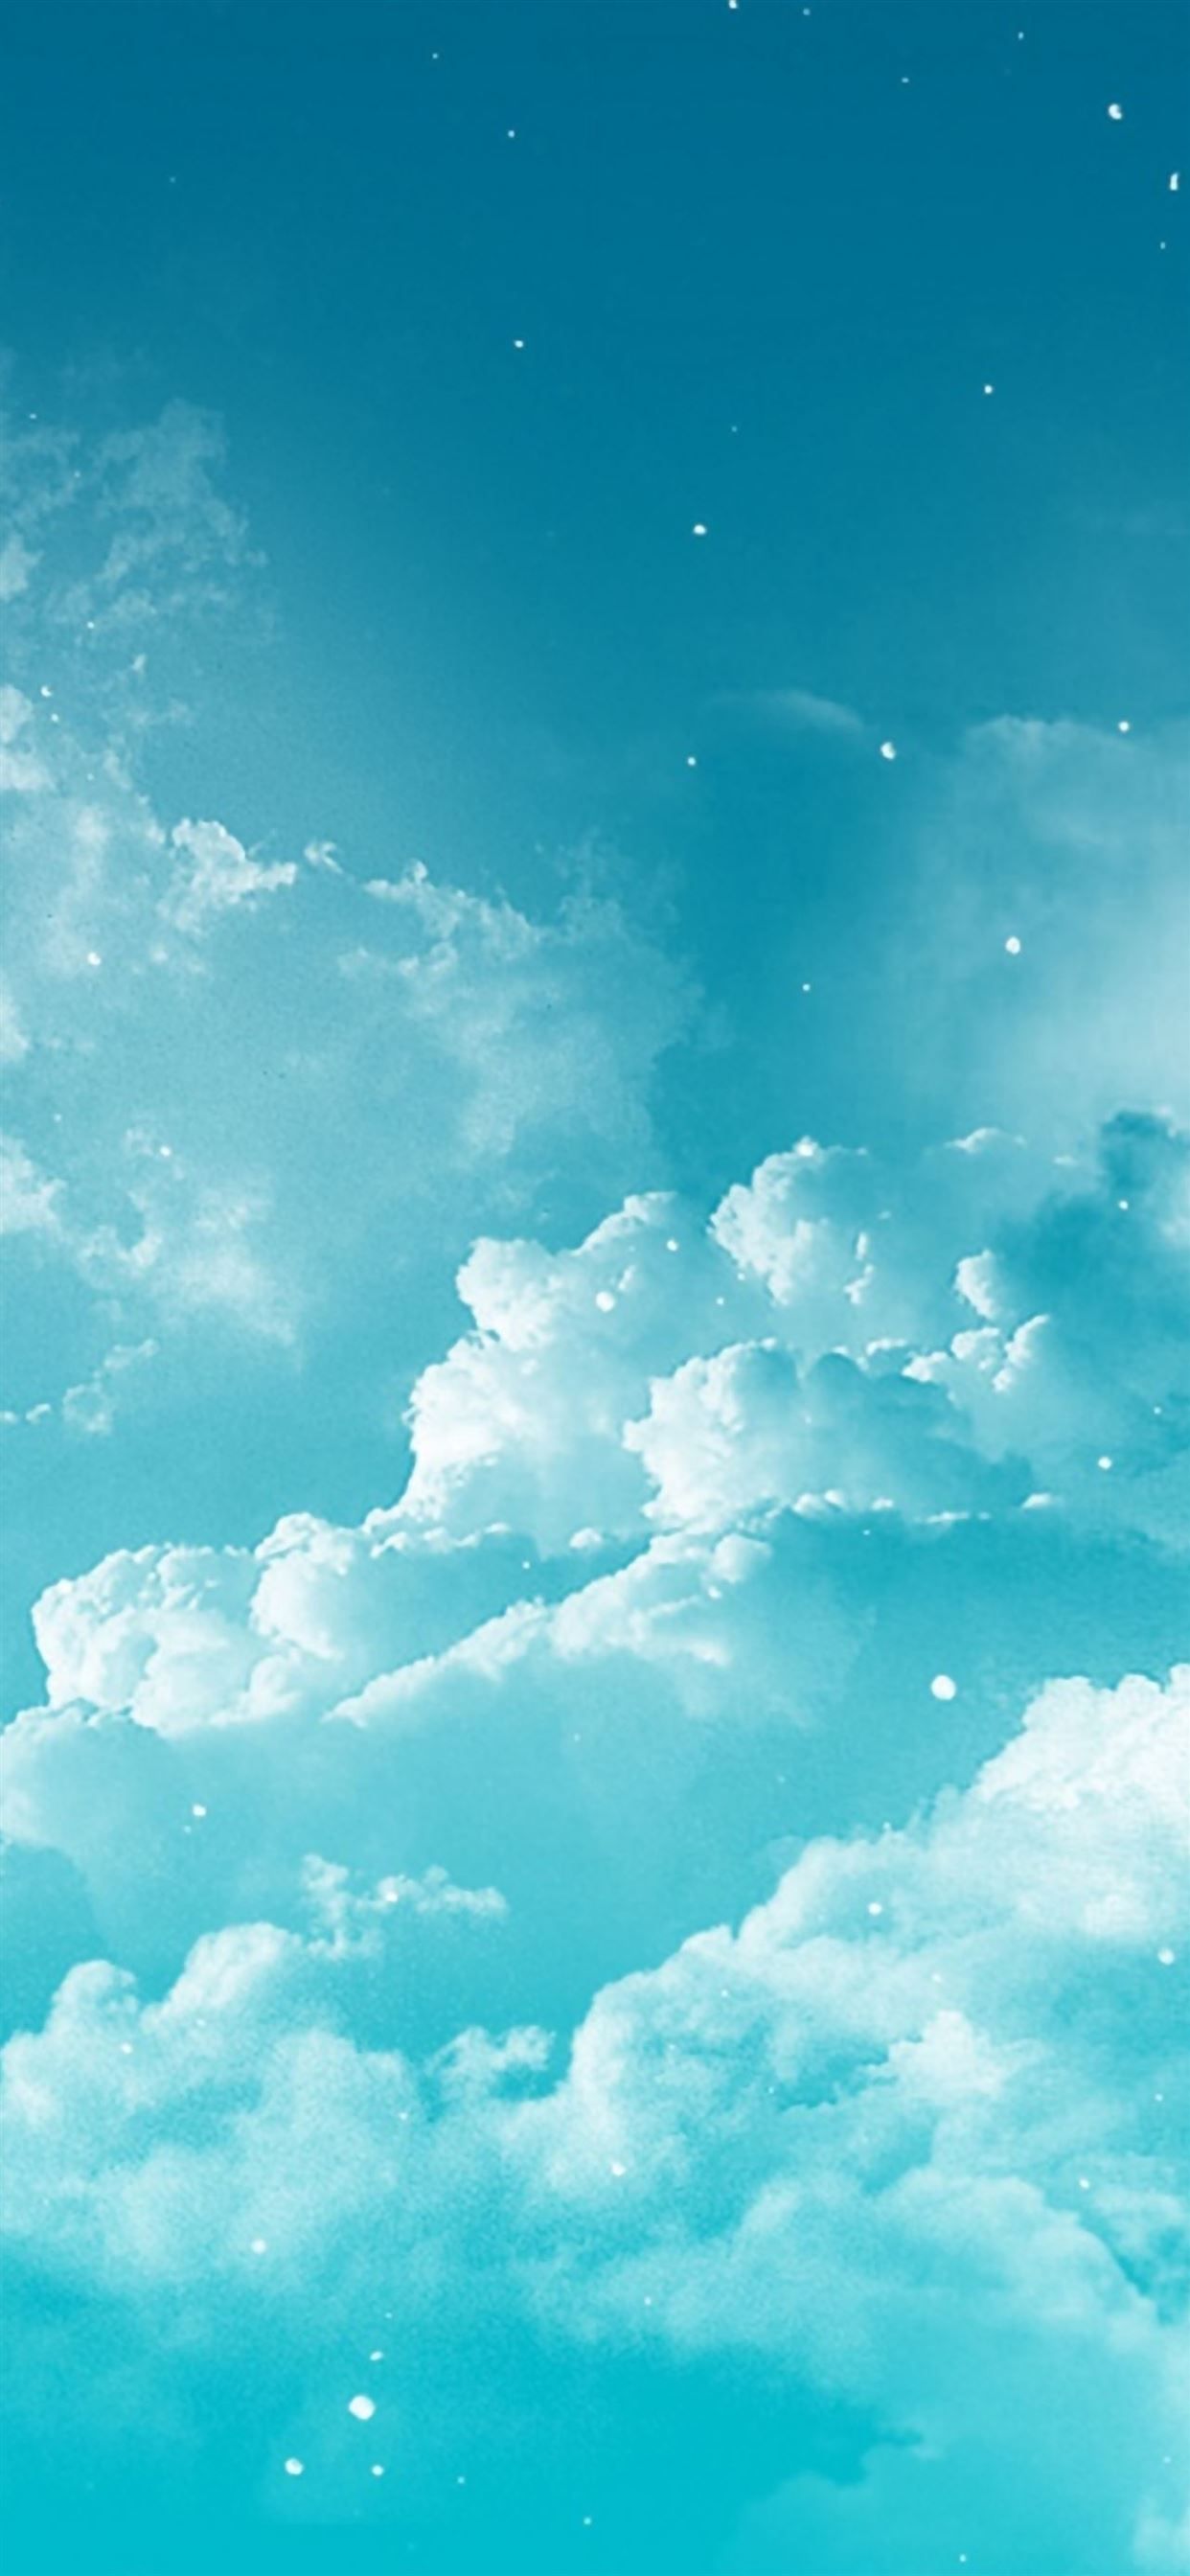 Fantasy Cloudy Space iPhone Wallpaper Free Download